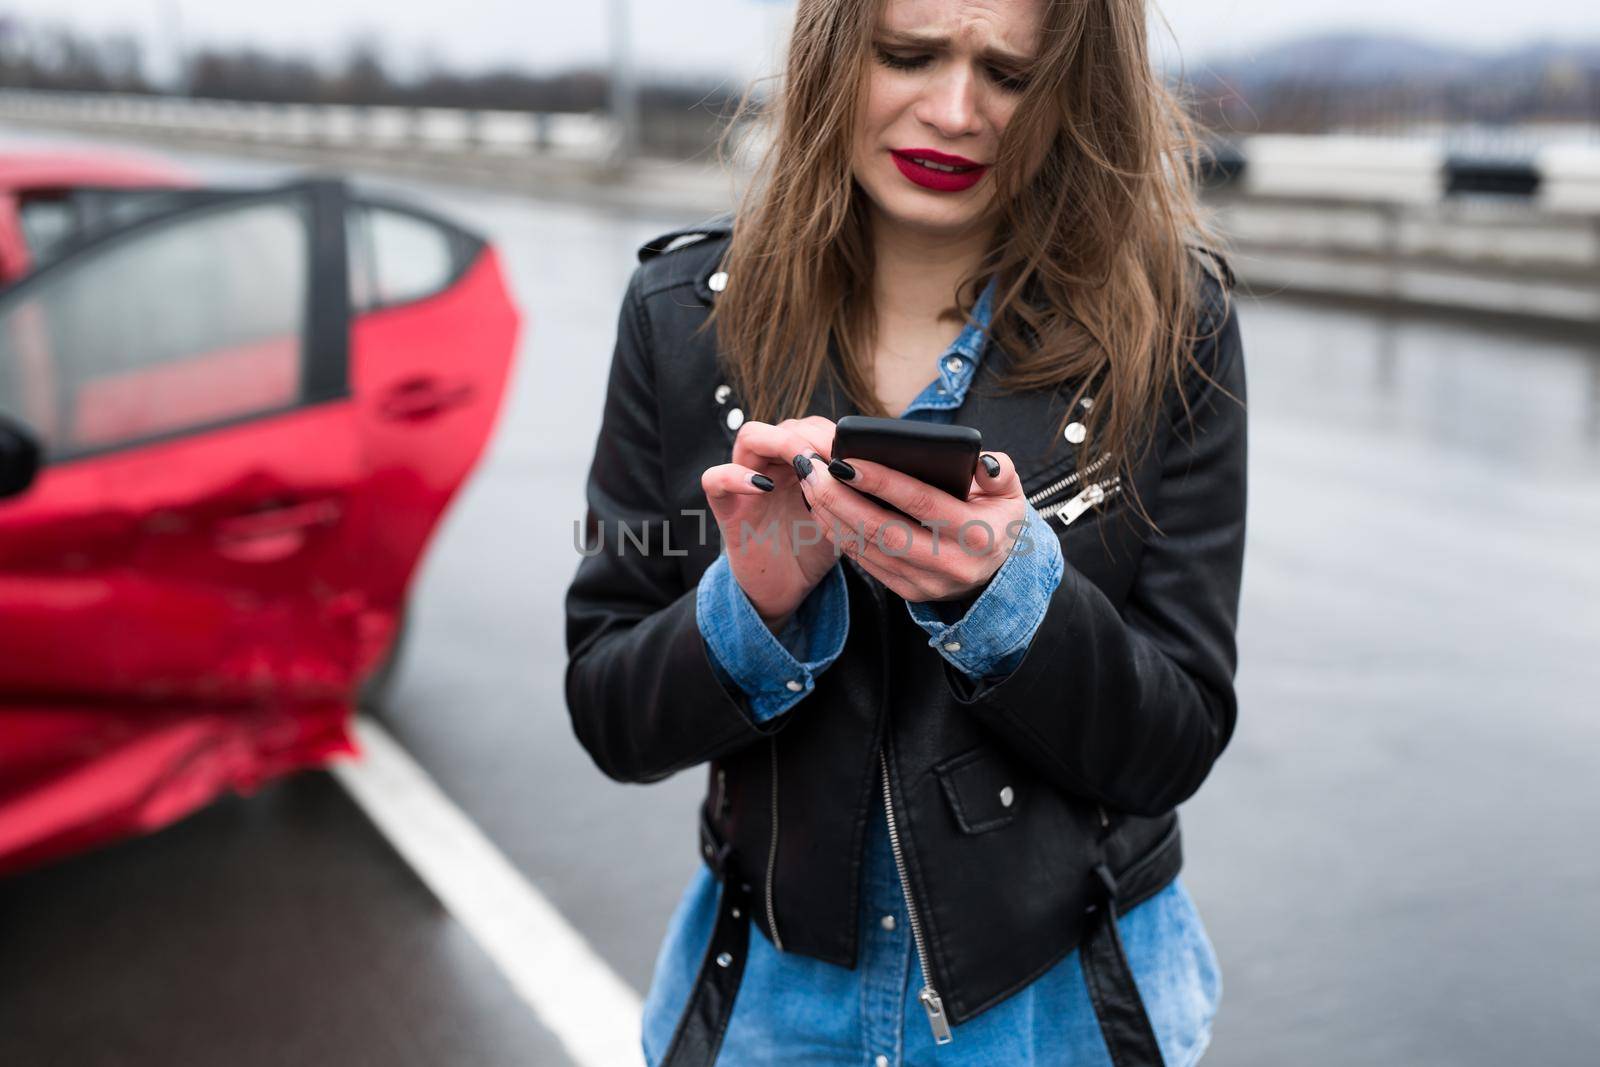 Woman calls to a service standing by a red car